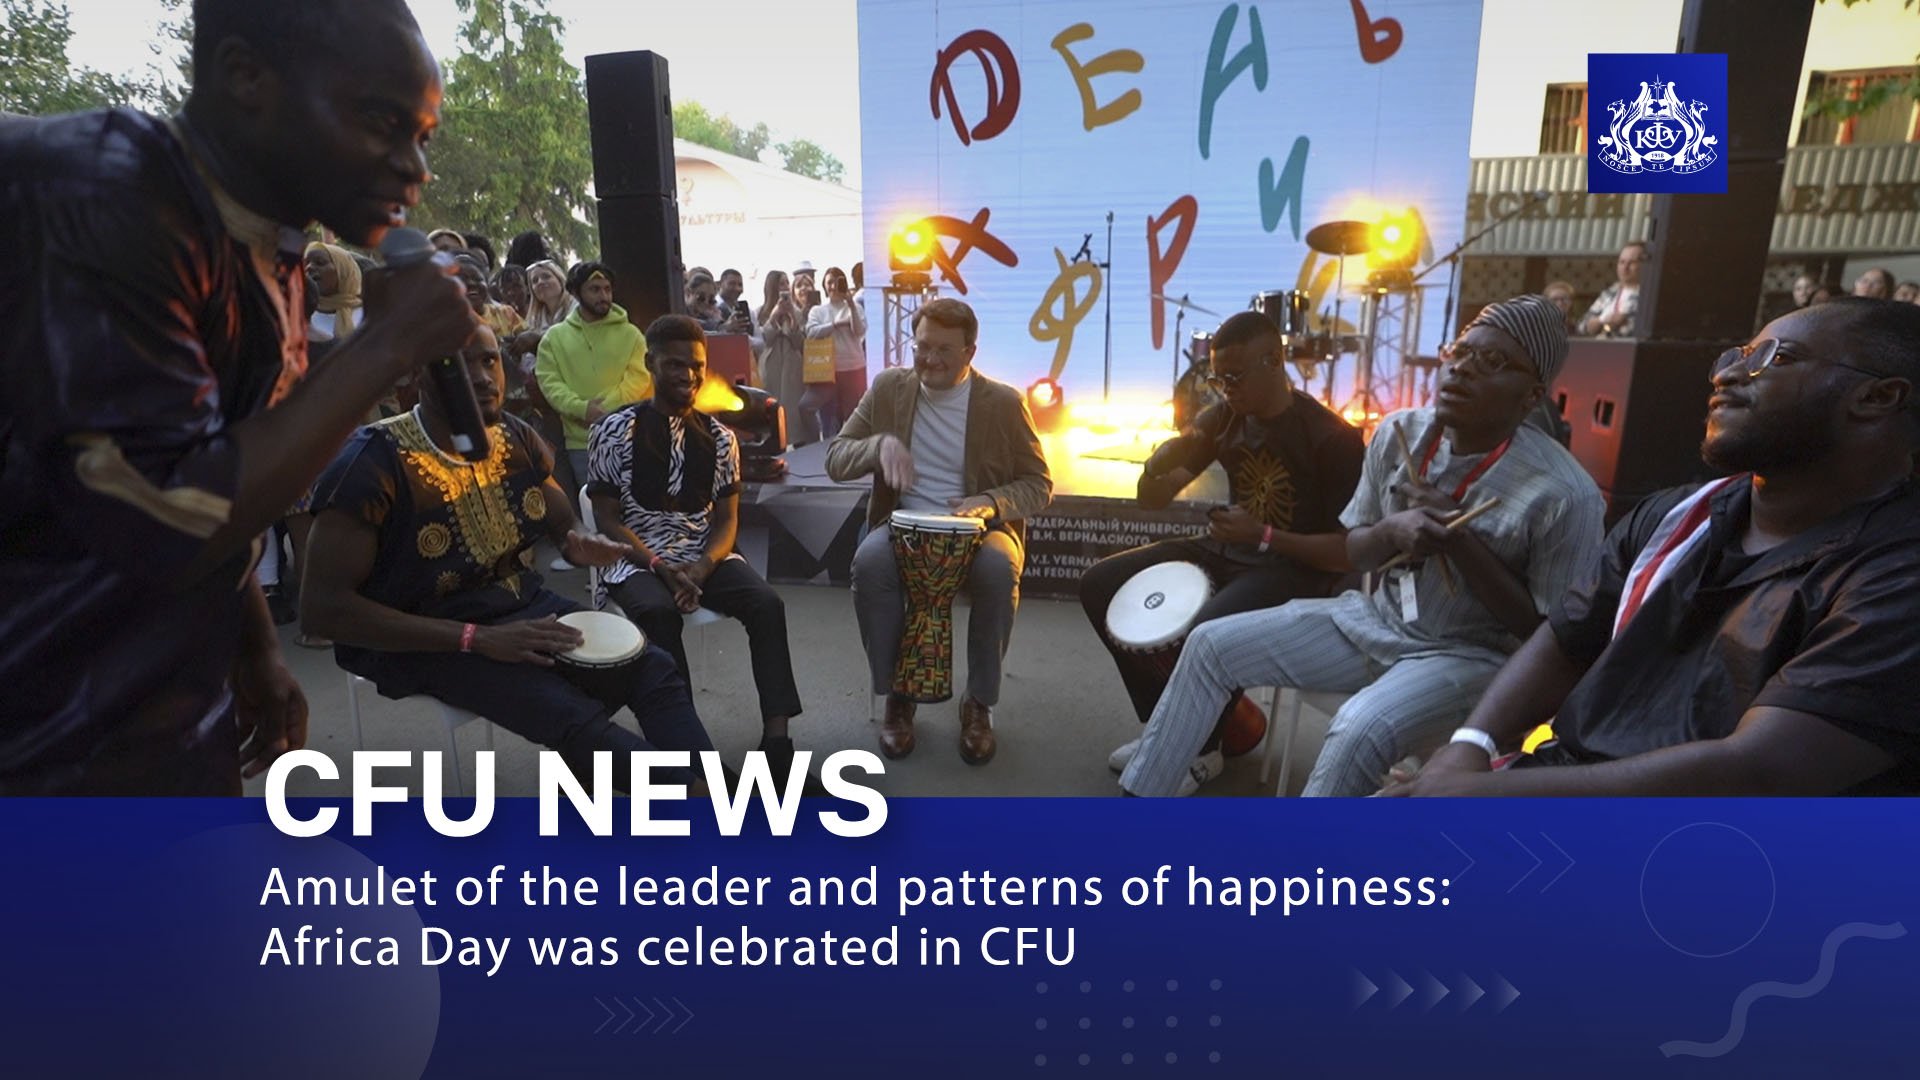 Amulet of the leader and patterns of happiness: Africa Day was celebrated in СFU